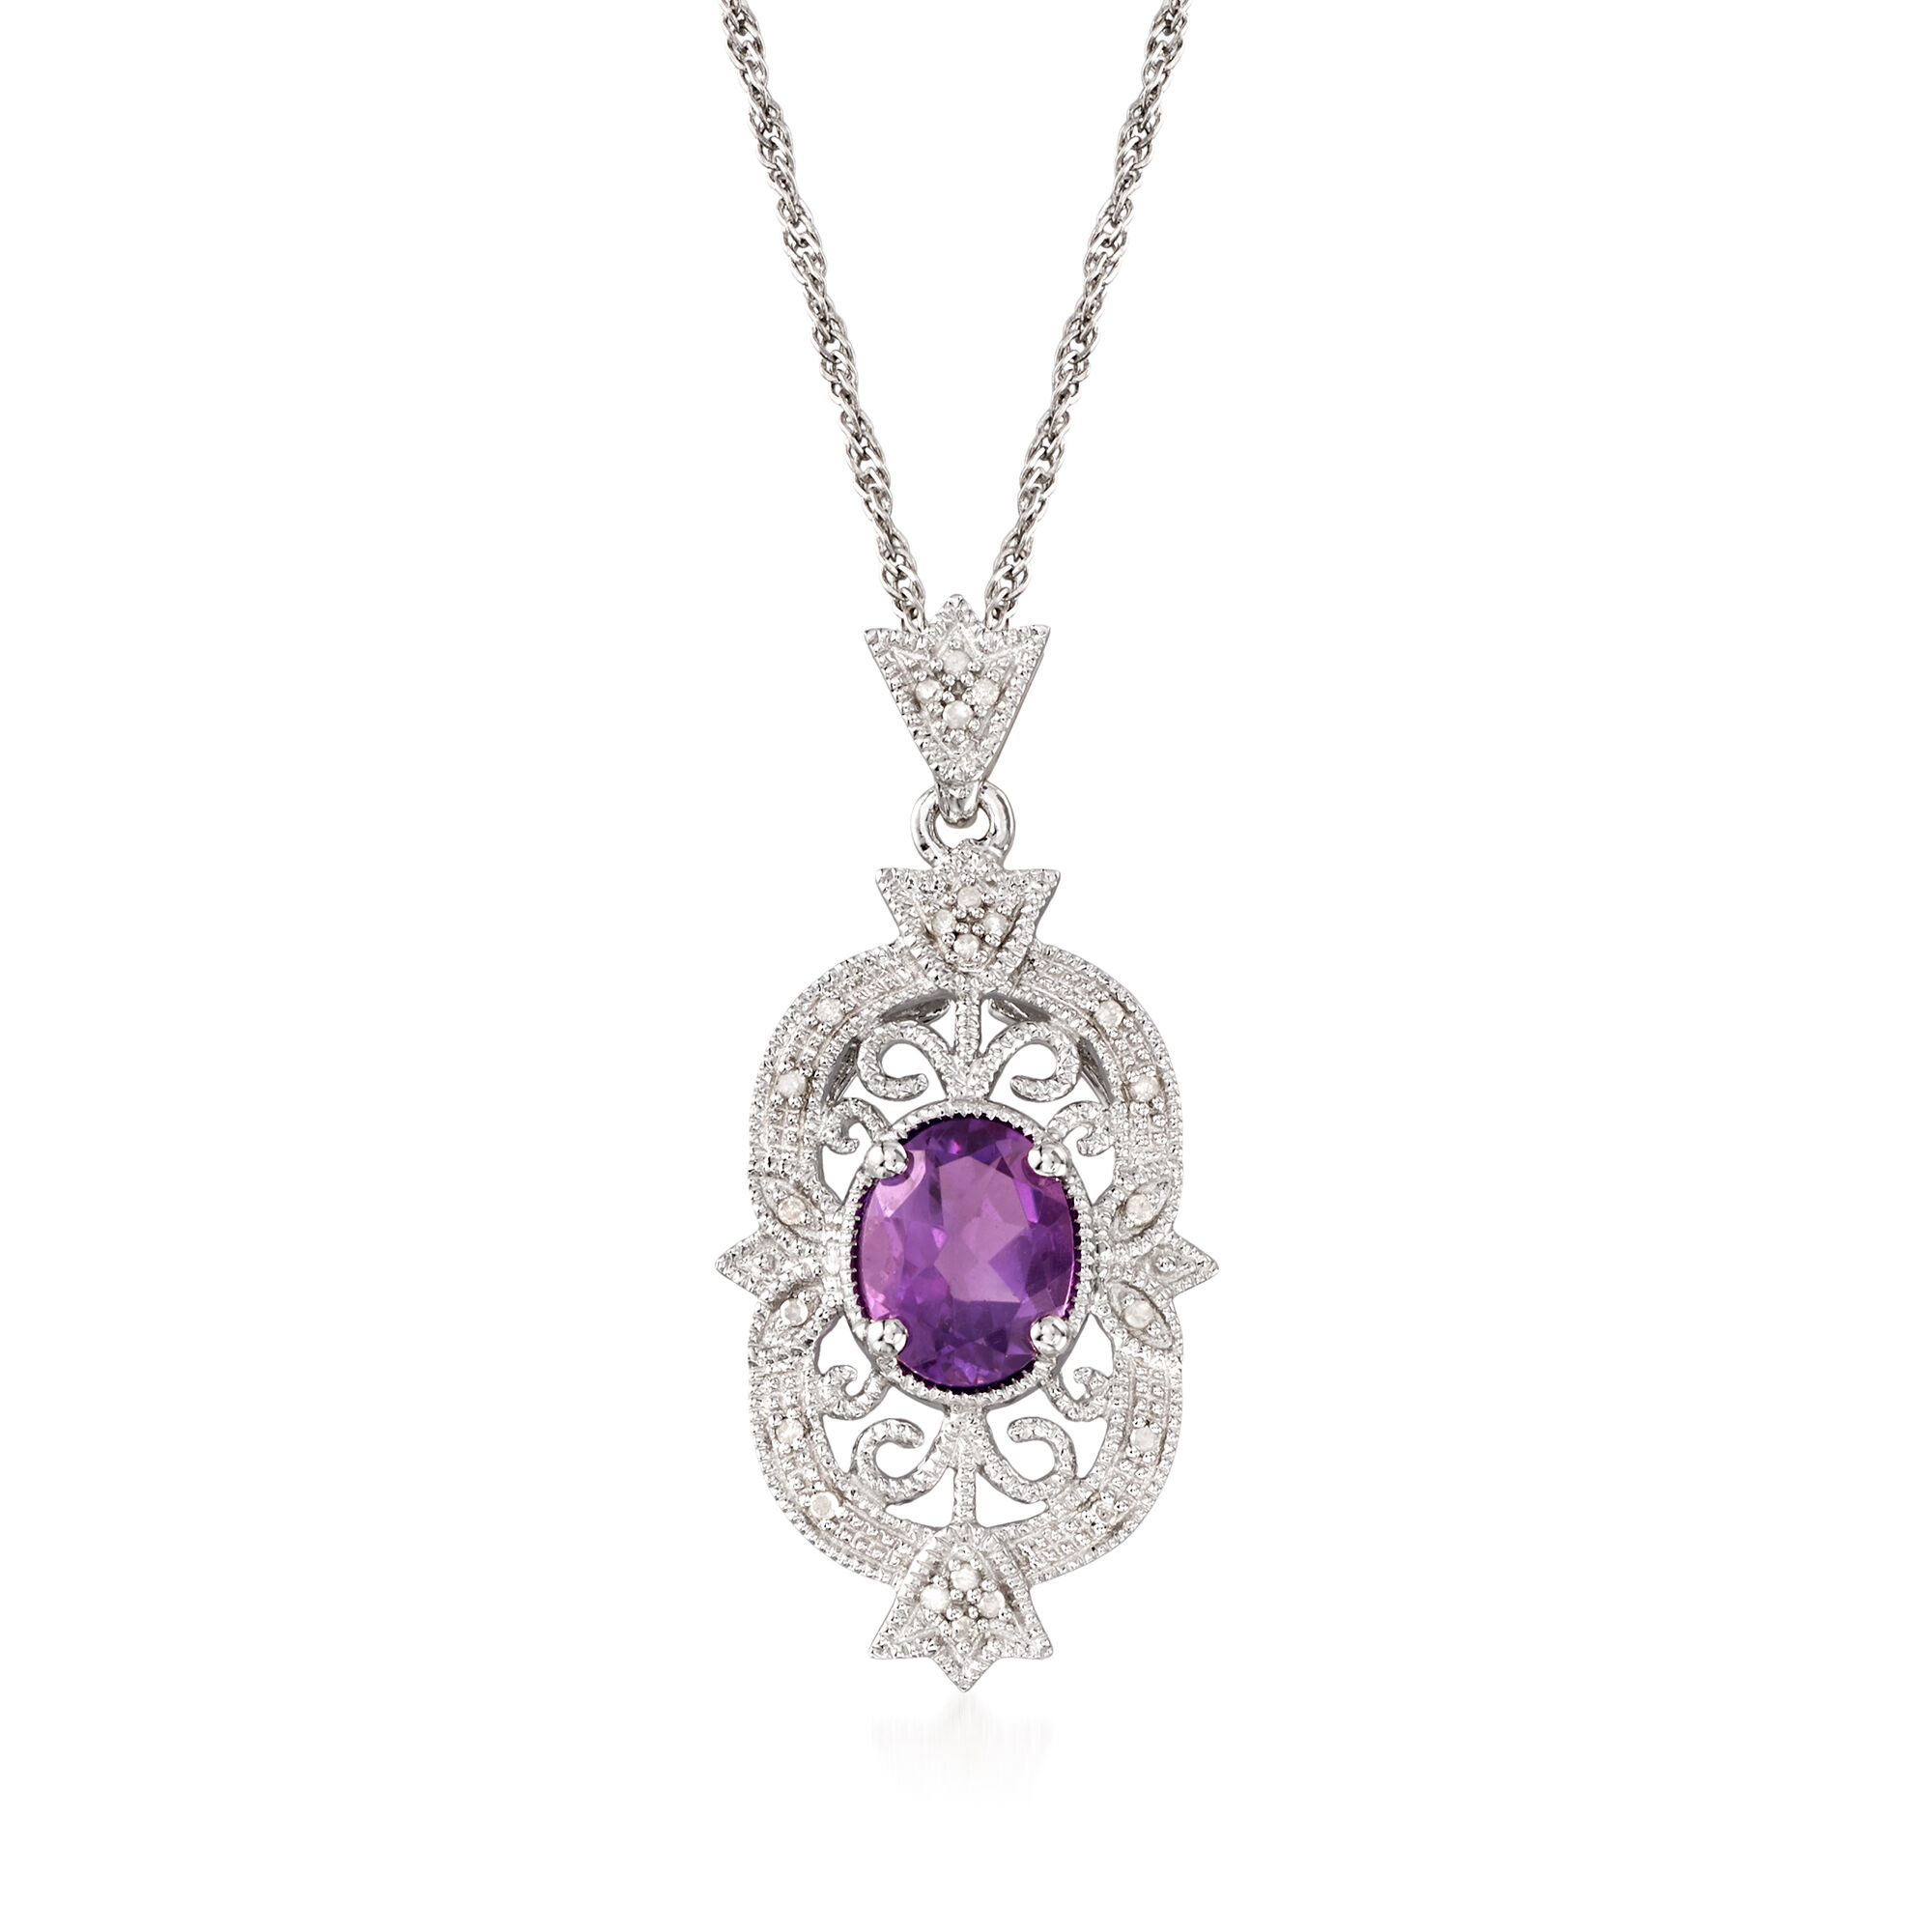 ctw Details about   Solitaire Round Amethyst Pendant Necklace in Sterling Silver 3/4 Carat